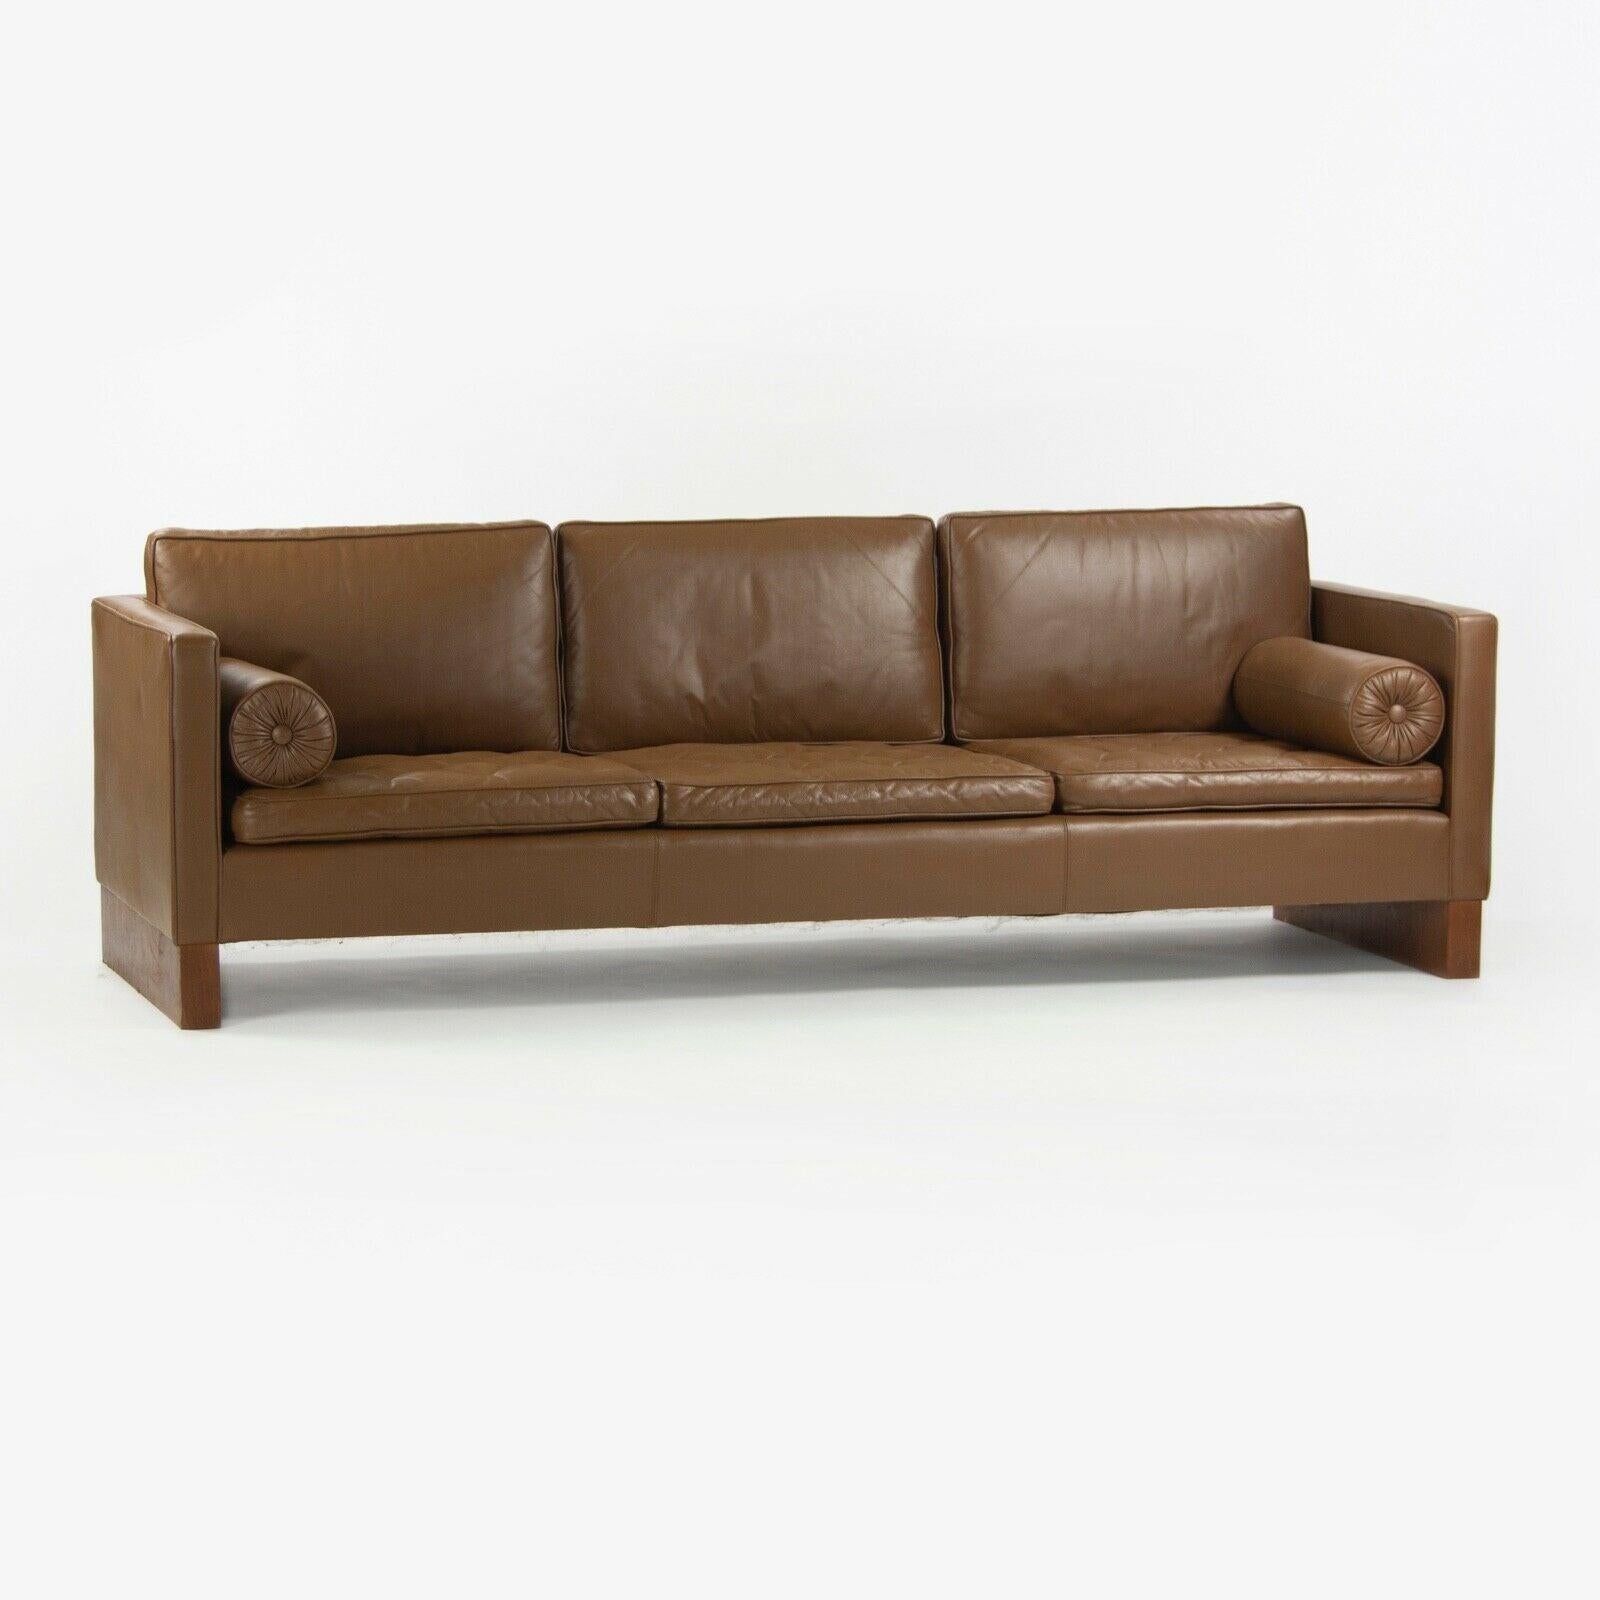 1960s Mies Van Der Rohe for Knoll International Brown Leather Three Seat Sofa For Sale 2